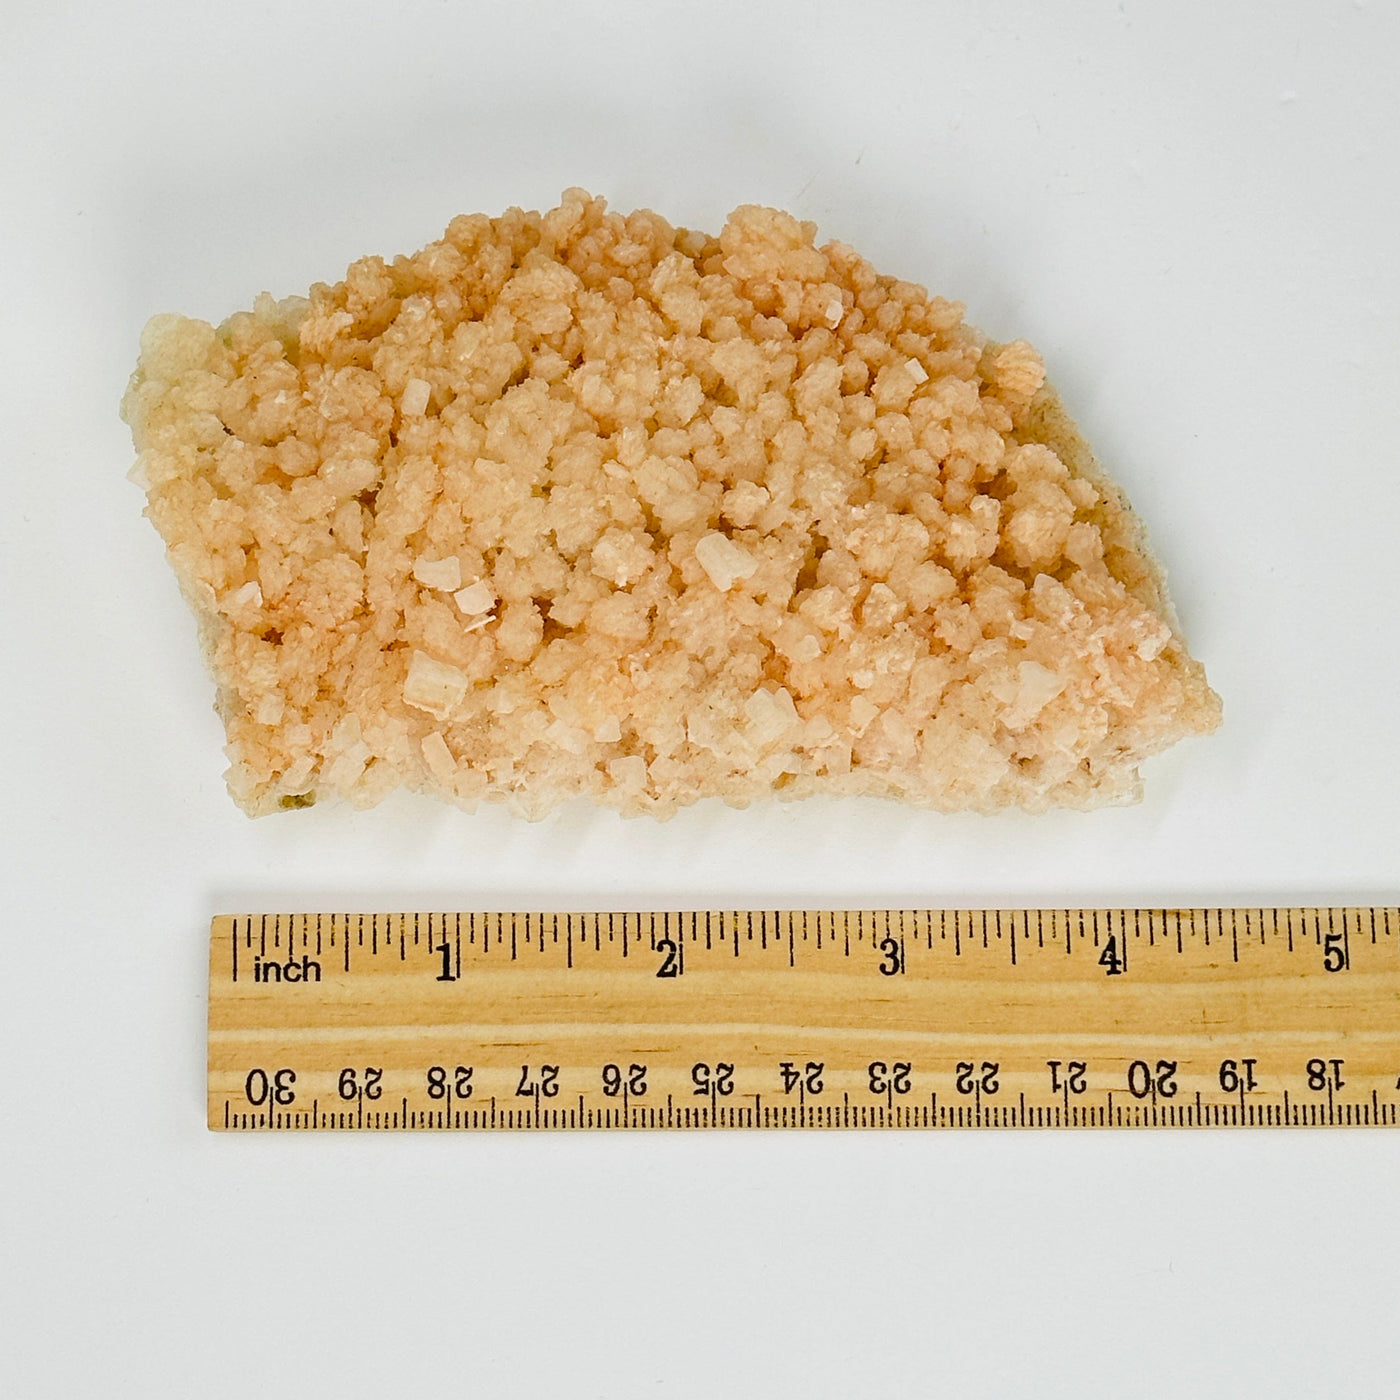 pink halite formation next to a ruler for size reference